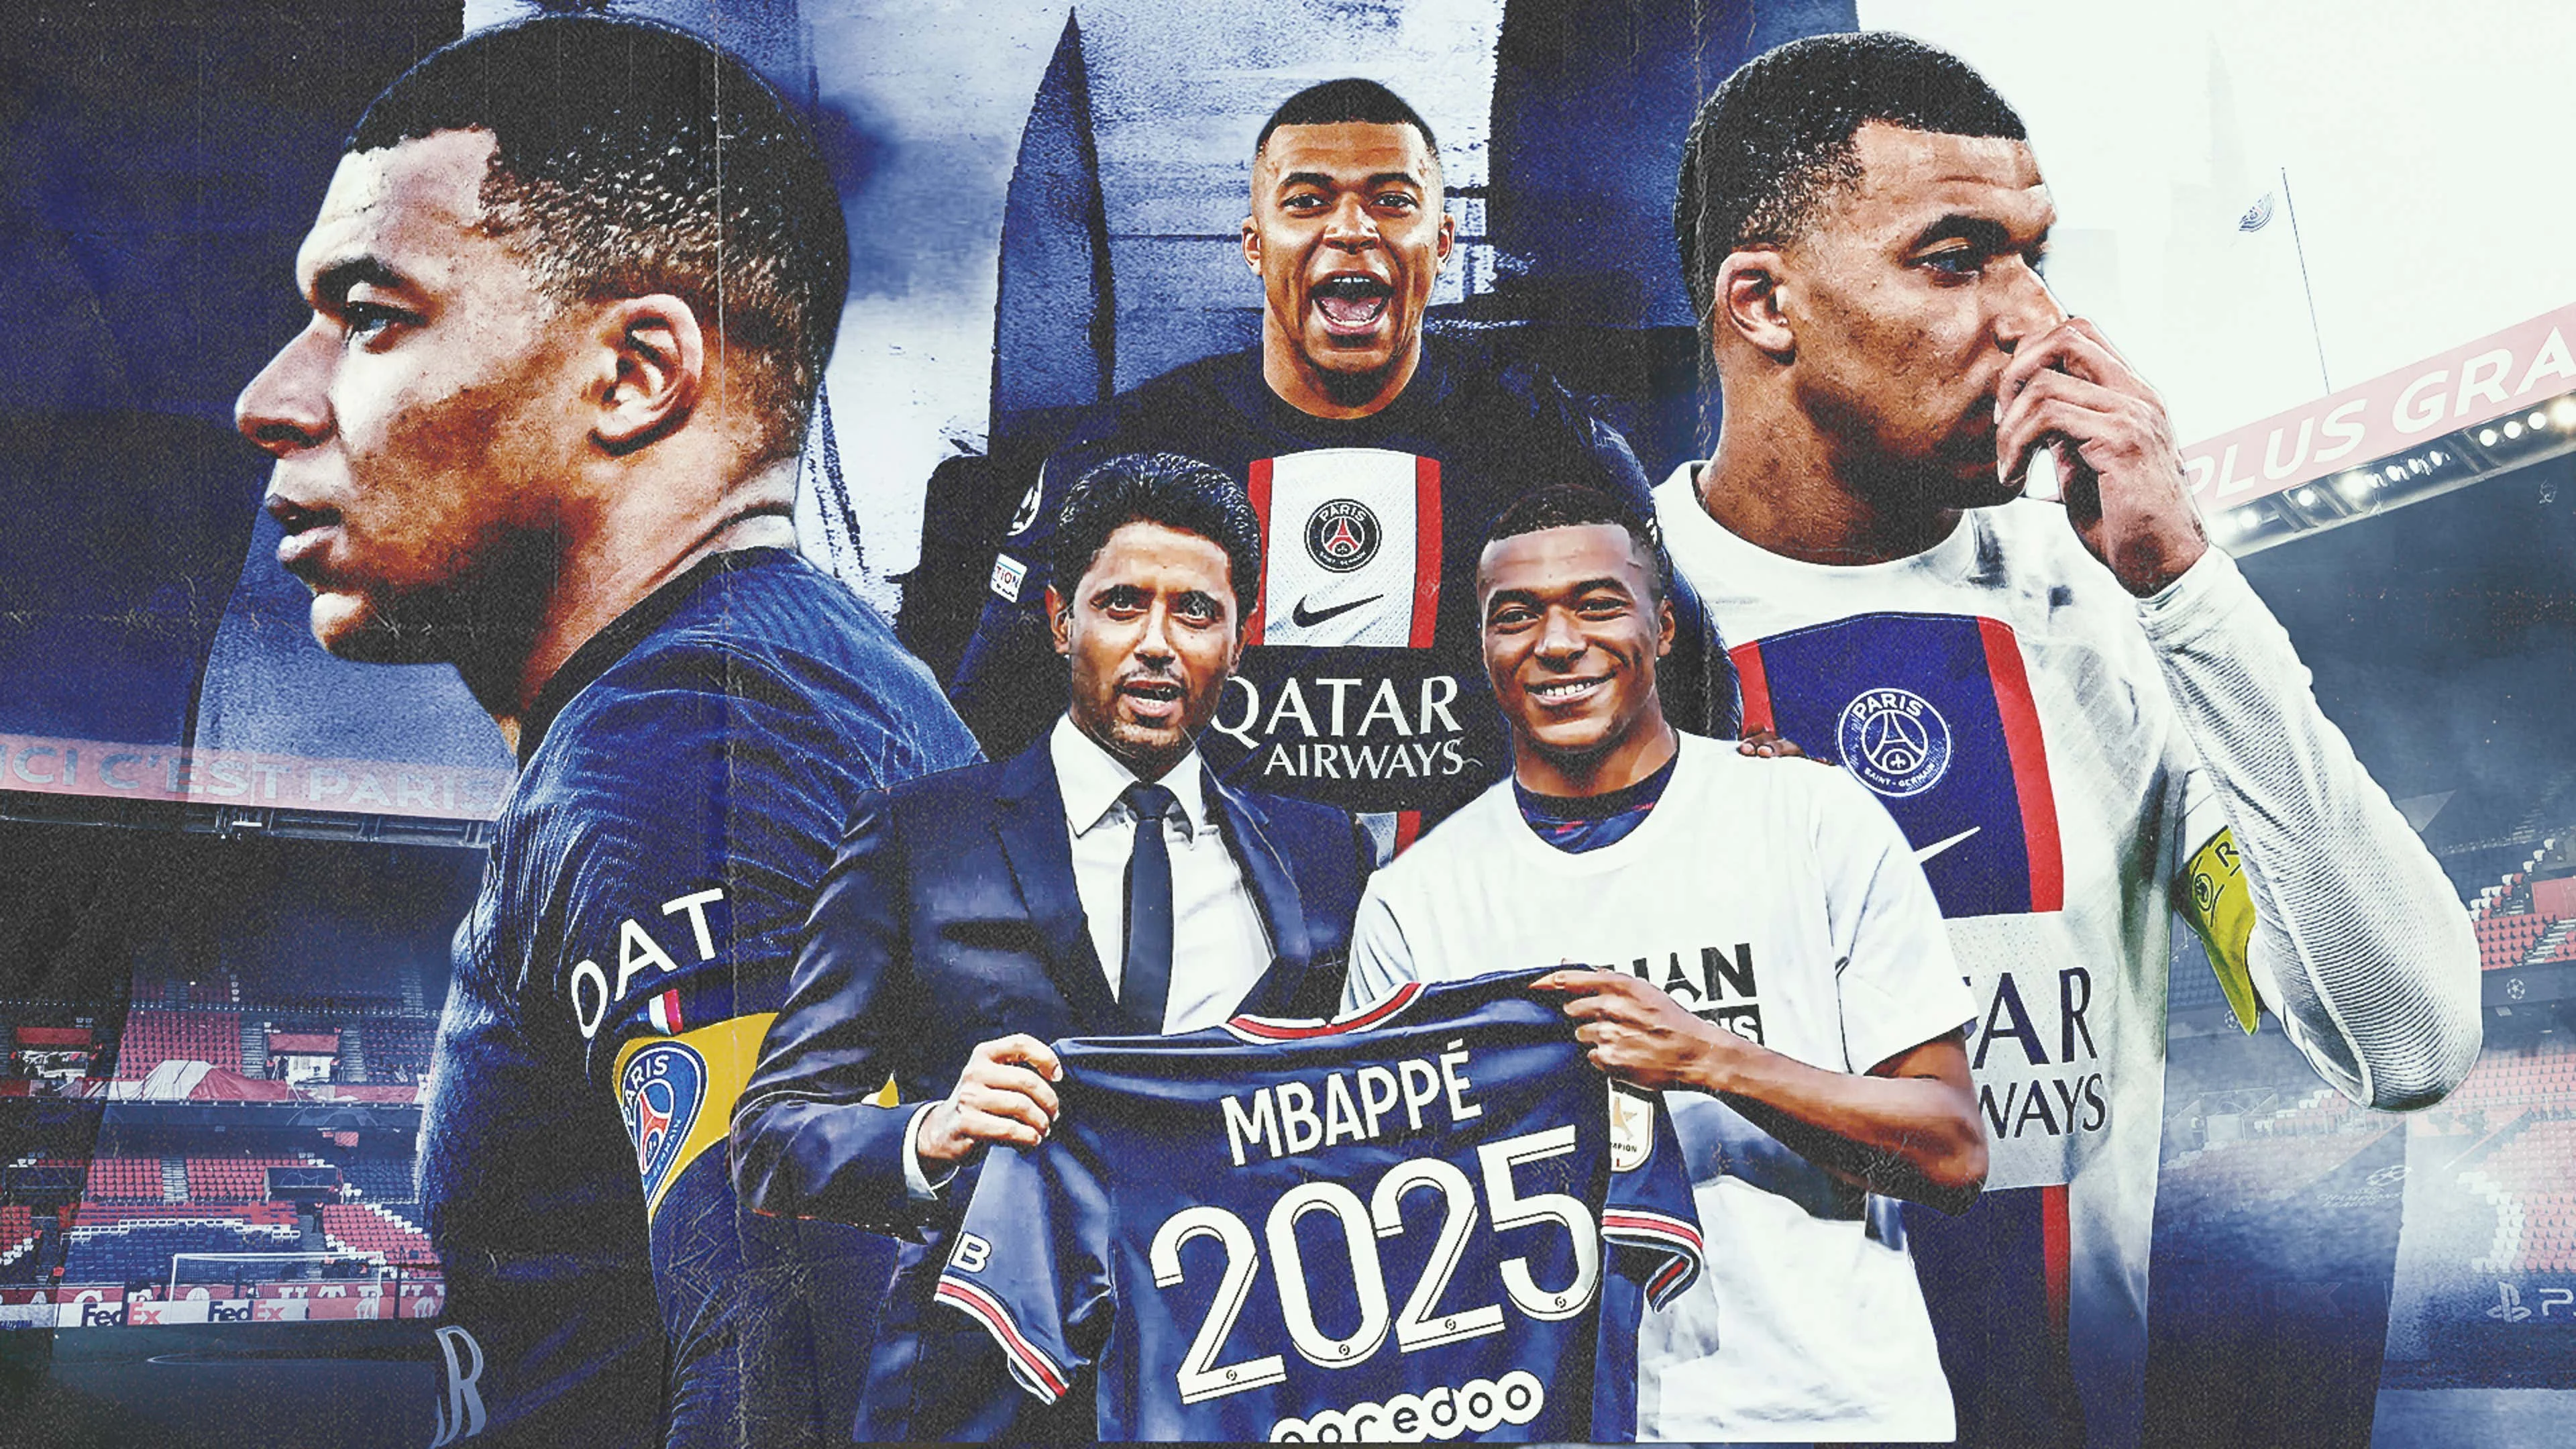 Mbappe To Receive €60m If Still A PSG Player By August